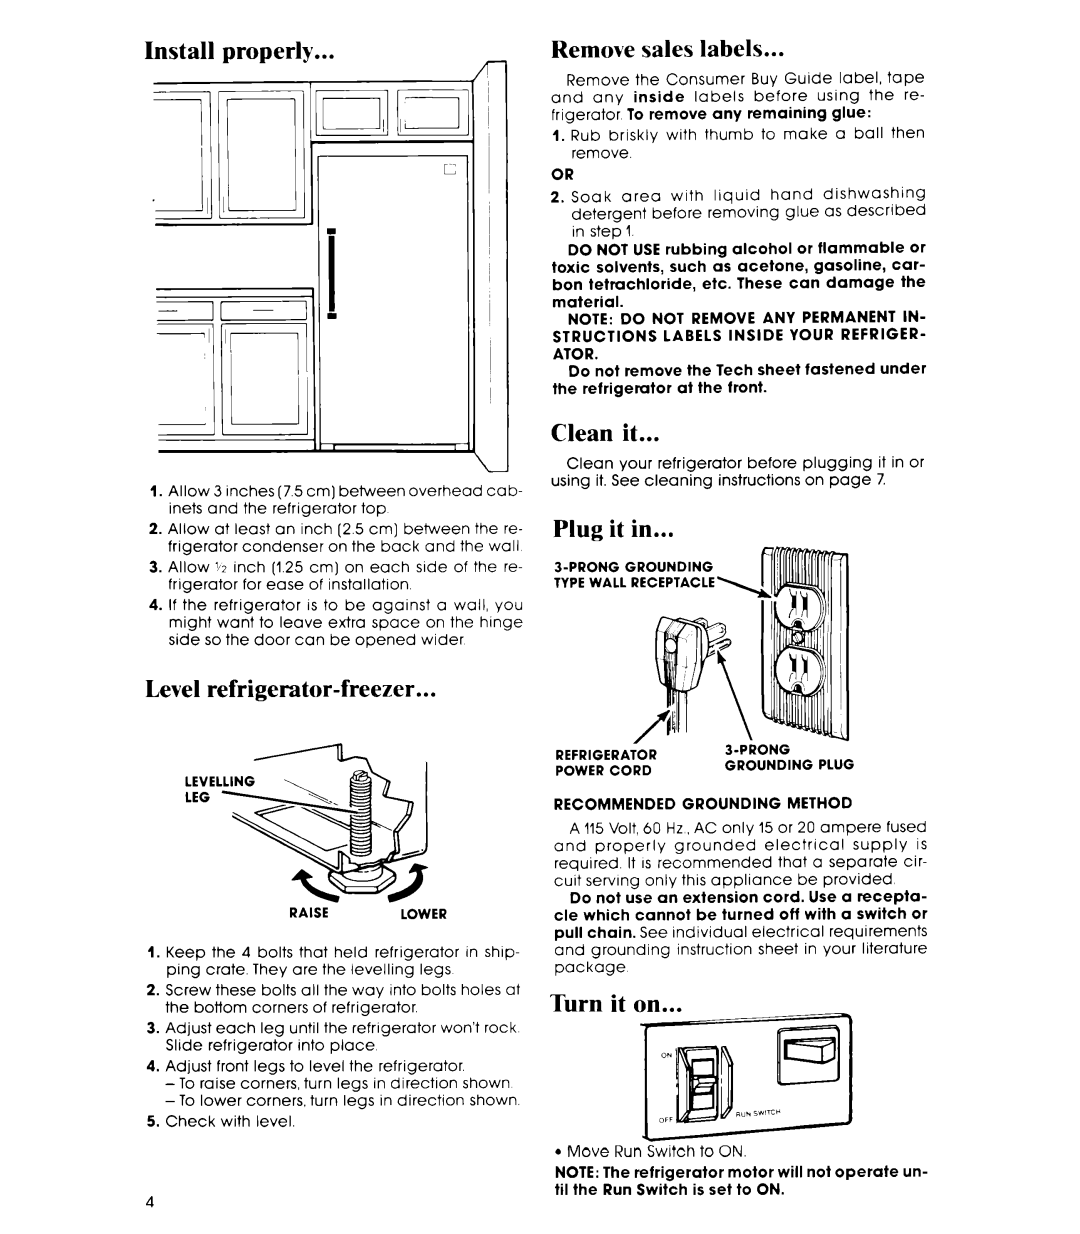 Whirlpool EL15SC manual Install properly, Level refrigerator-freezer, Clean it, Plug it in, Turn it on, Remove sales labels 